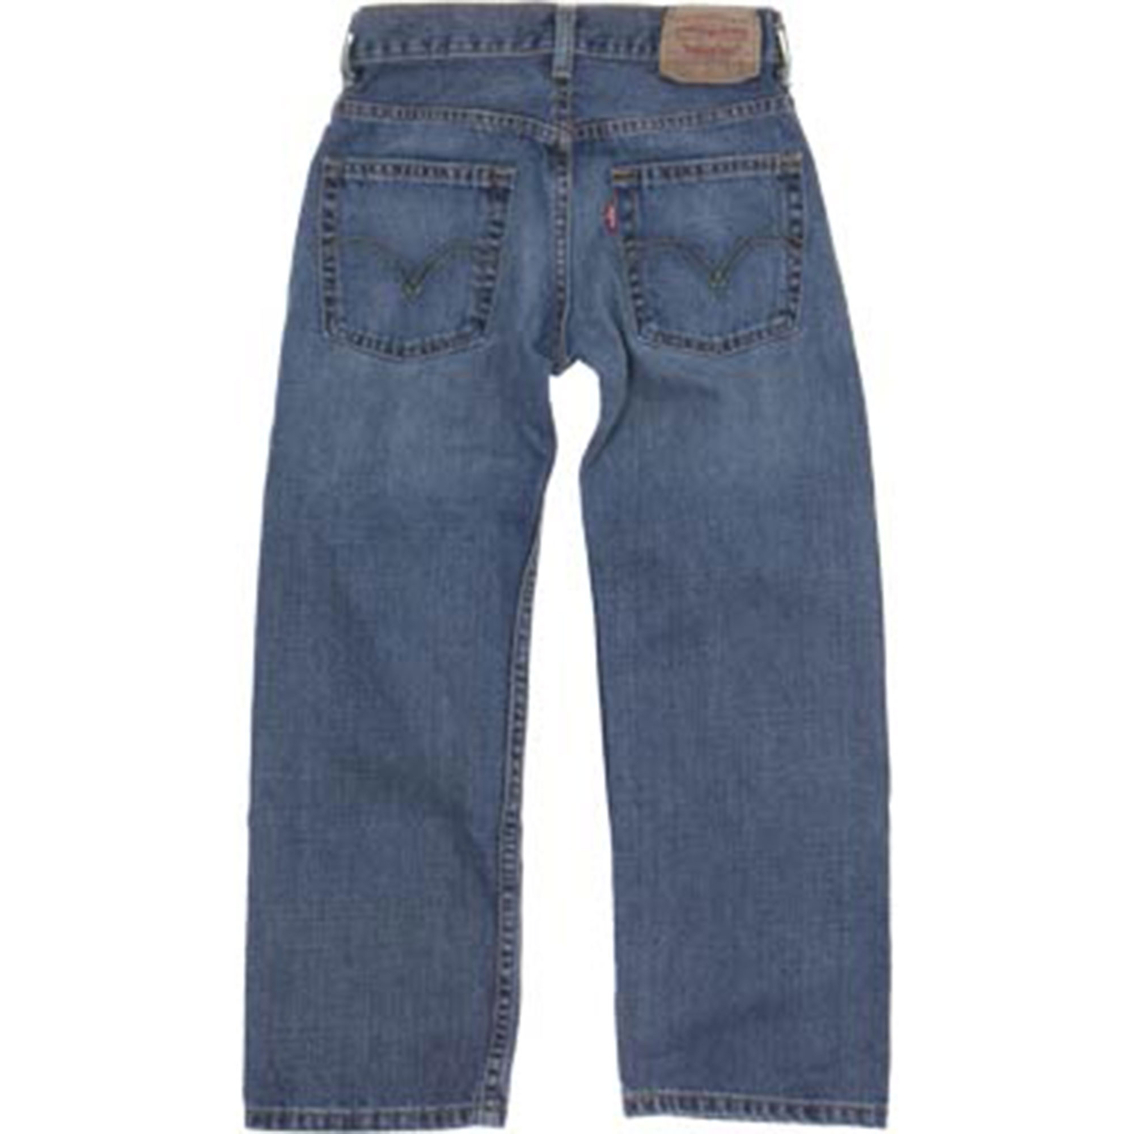 Levi's Husky Boys 550 Relaxed Fit Jeans - Image 2 of 2